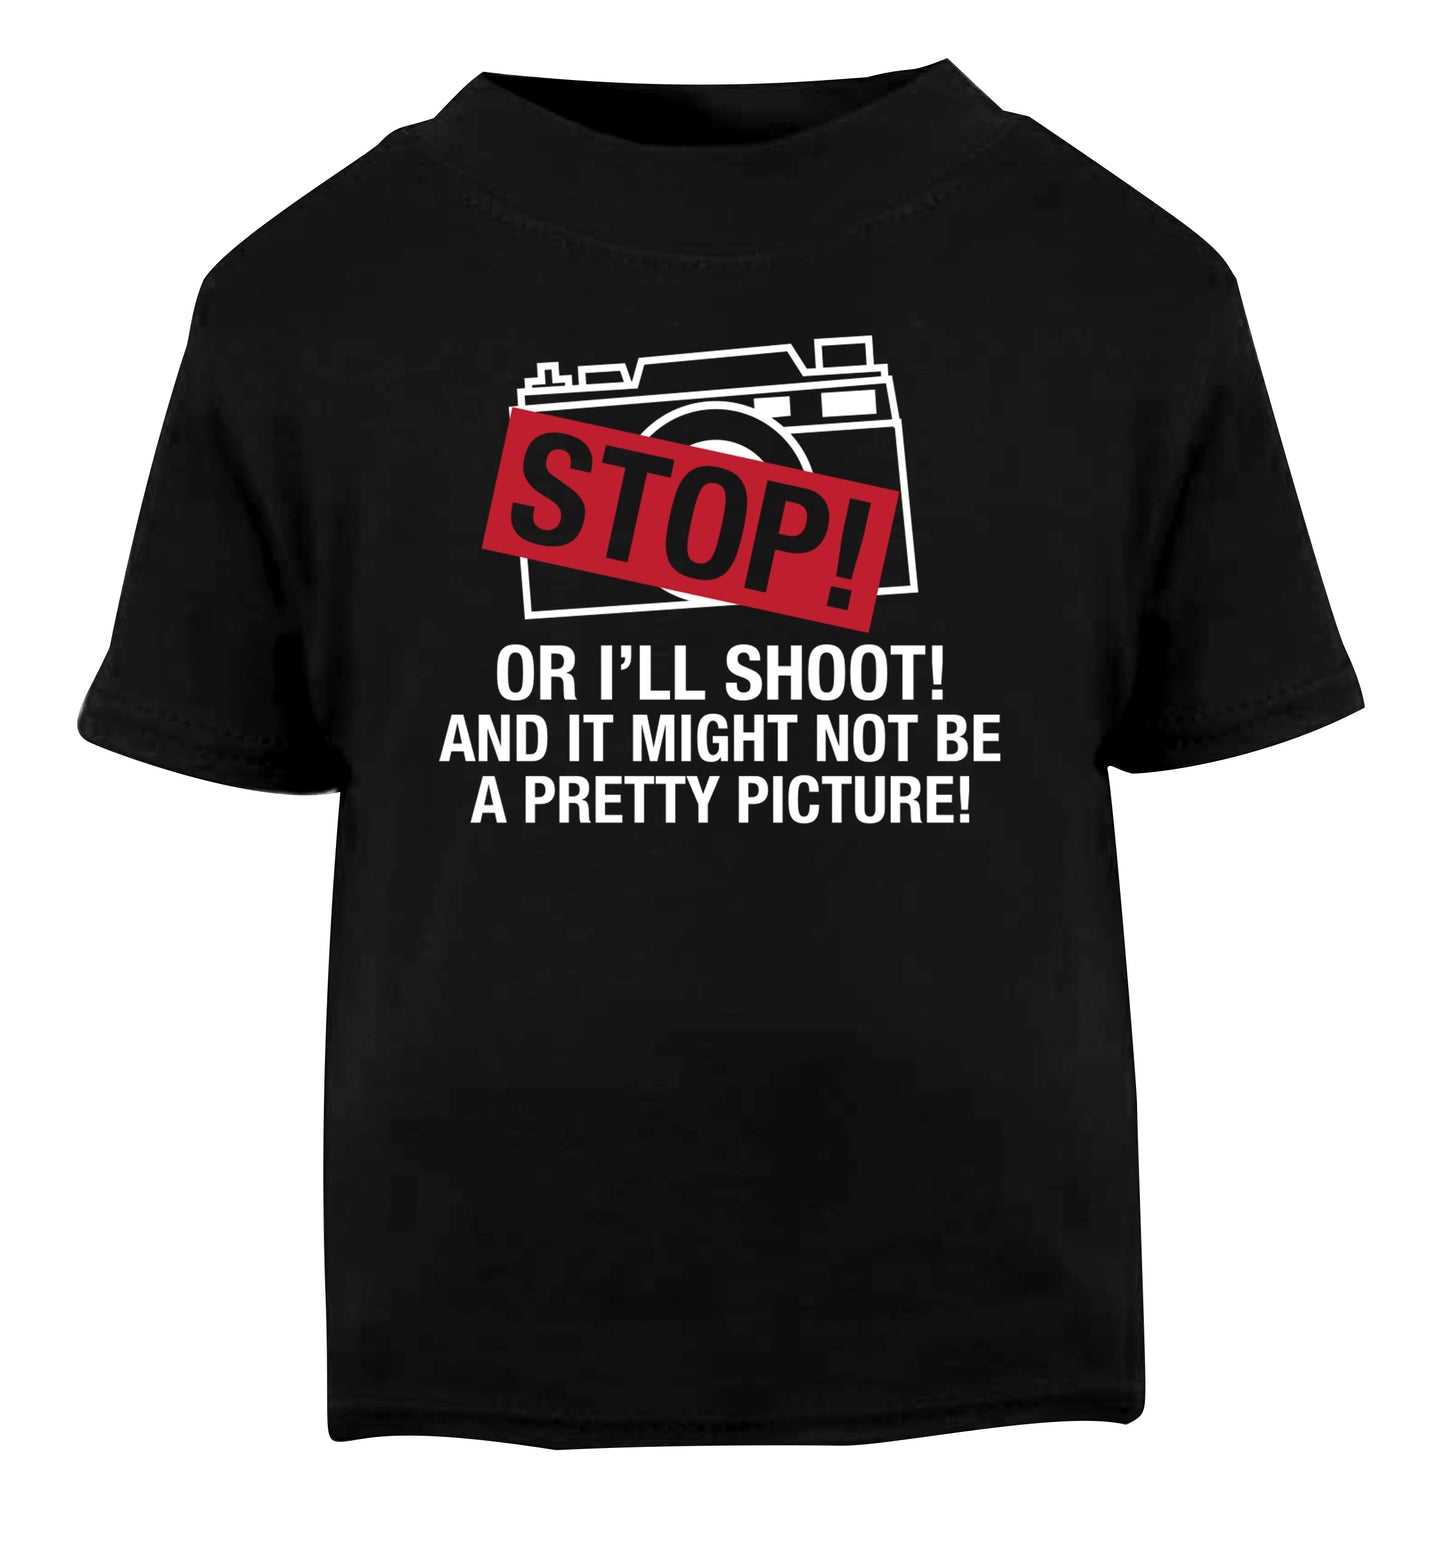 Stop or I'll shoot and it won't be a pretty picture Black Baby Toddler Tshirt 2 years